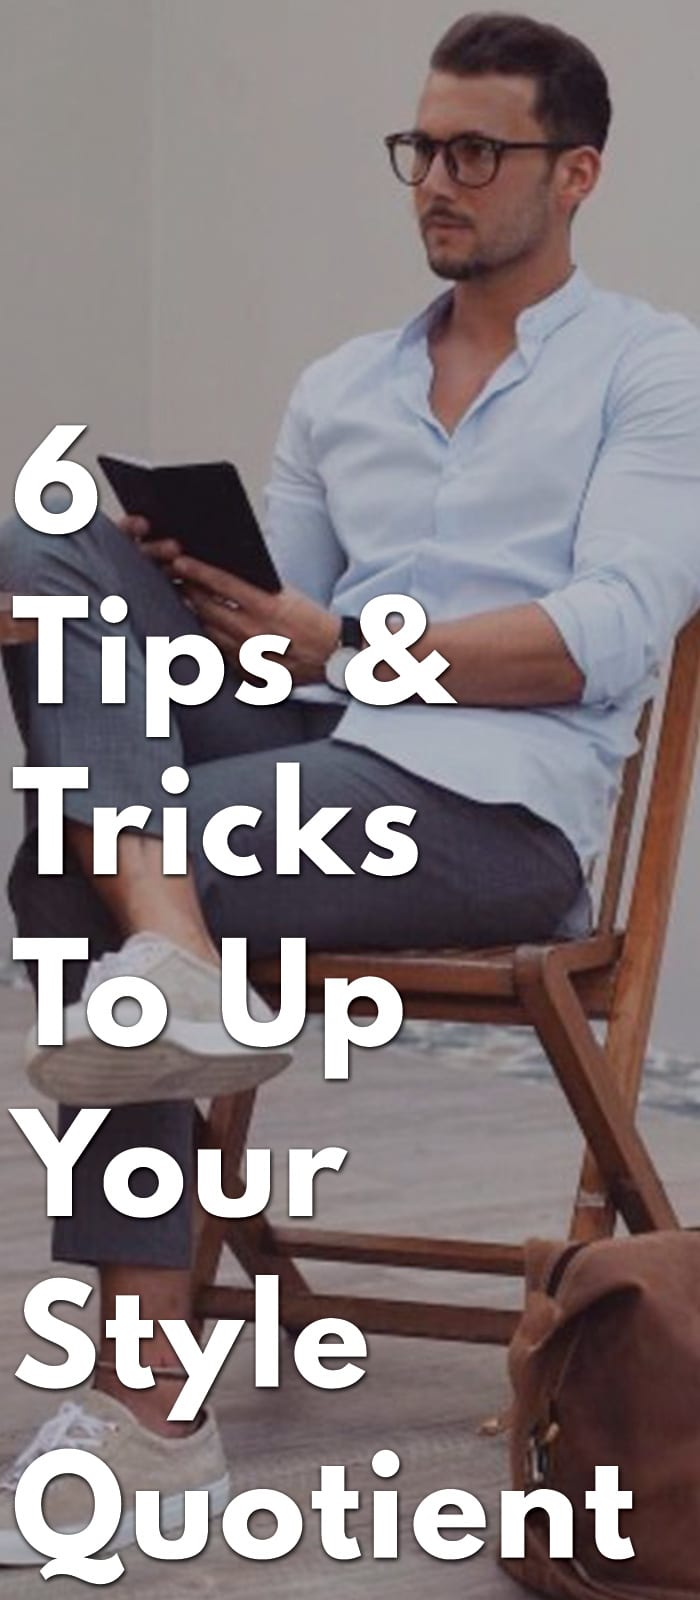 6-Tips-&-Tricks-To-Up-Your-Style-Quotient